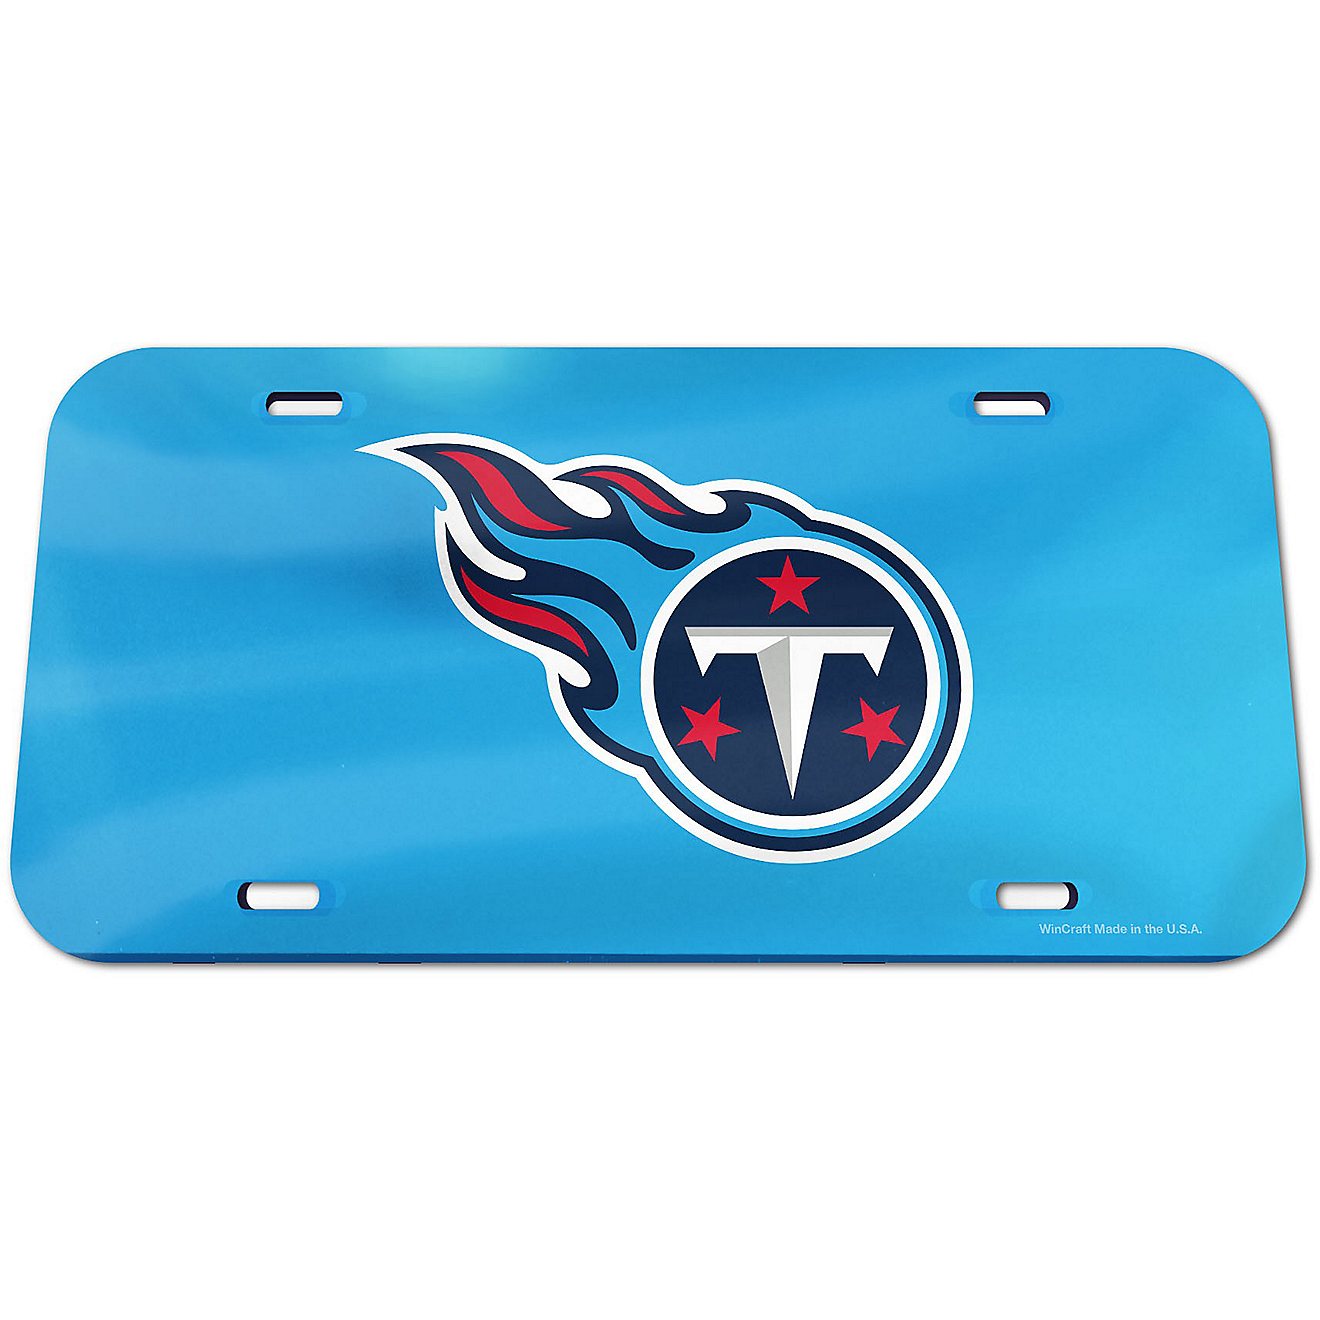 tennessee titans plates